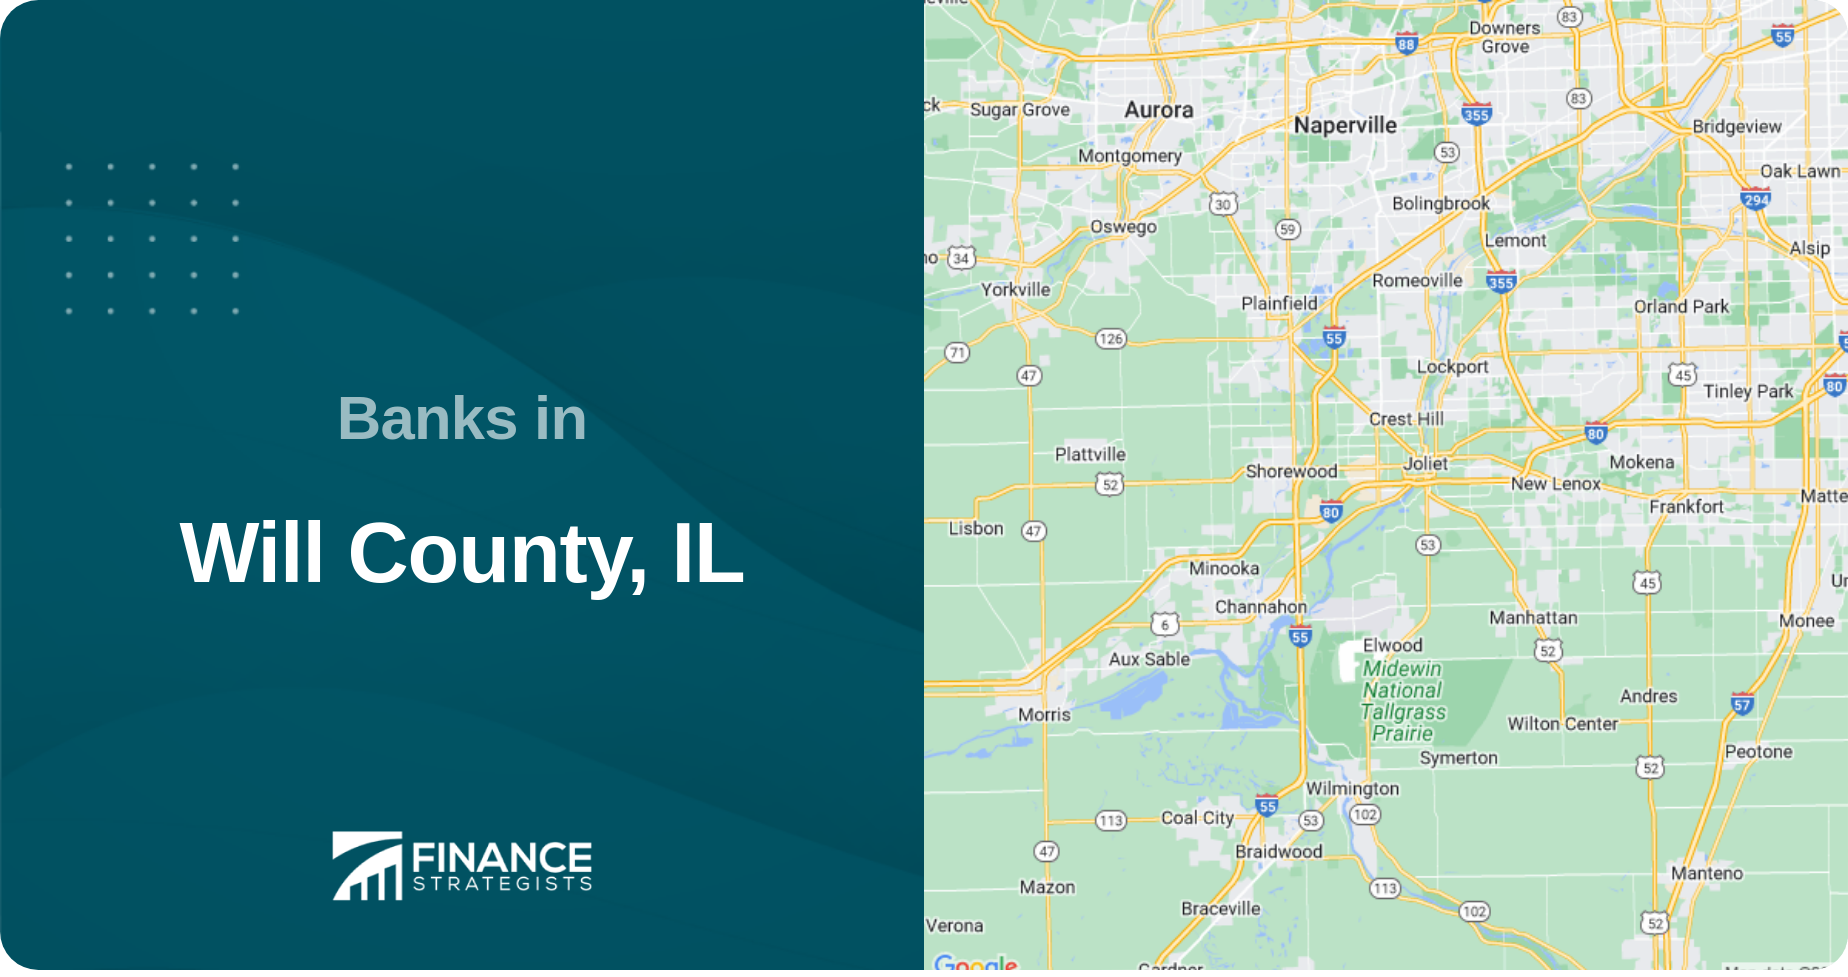 Banks in Will County, IL